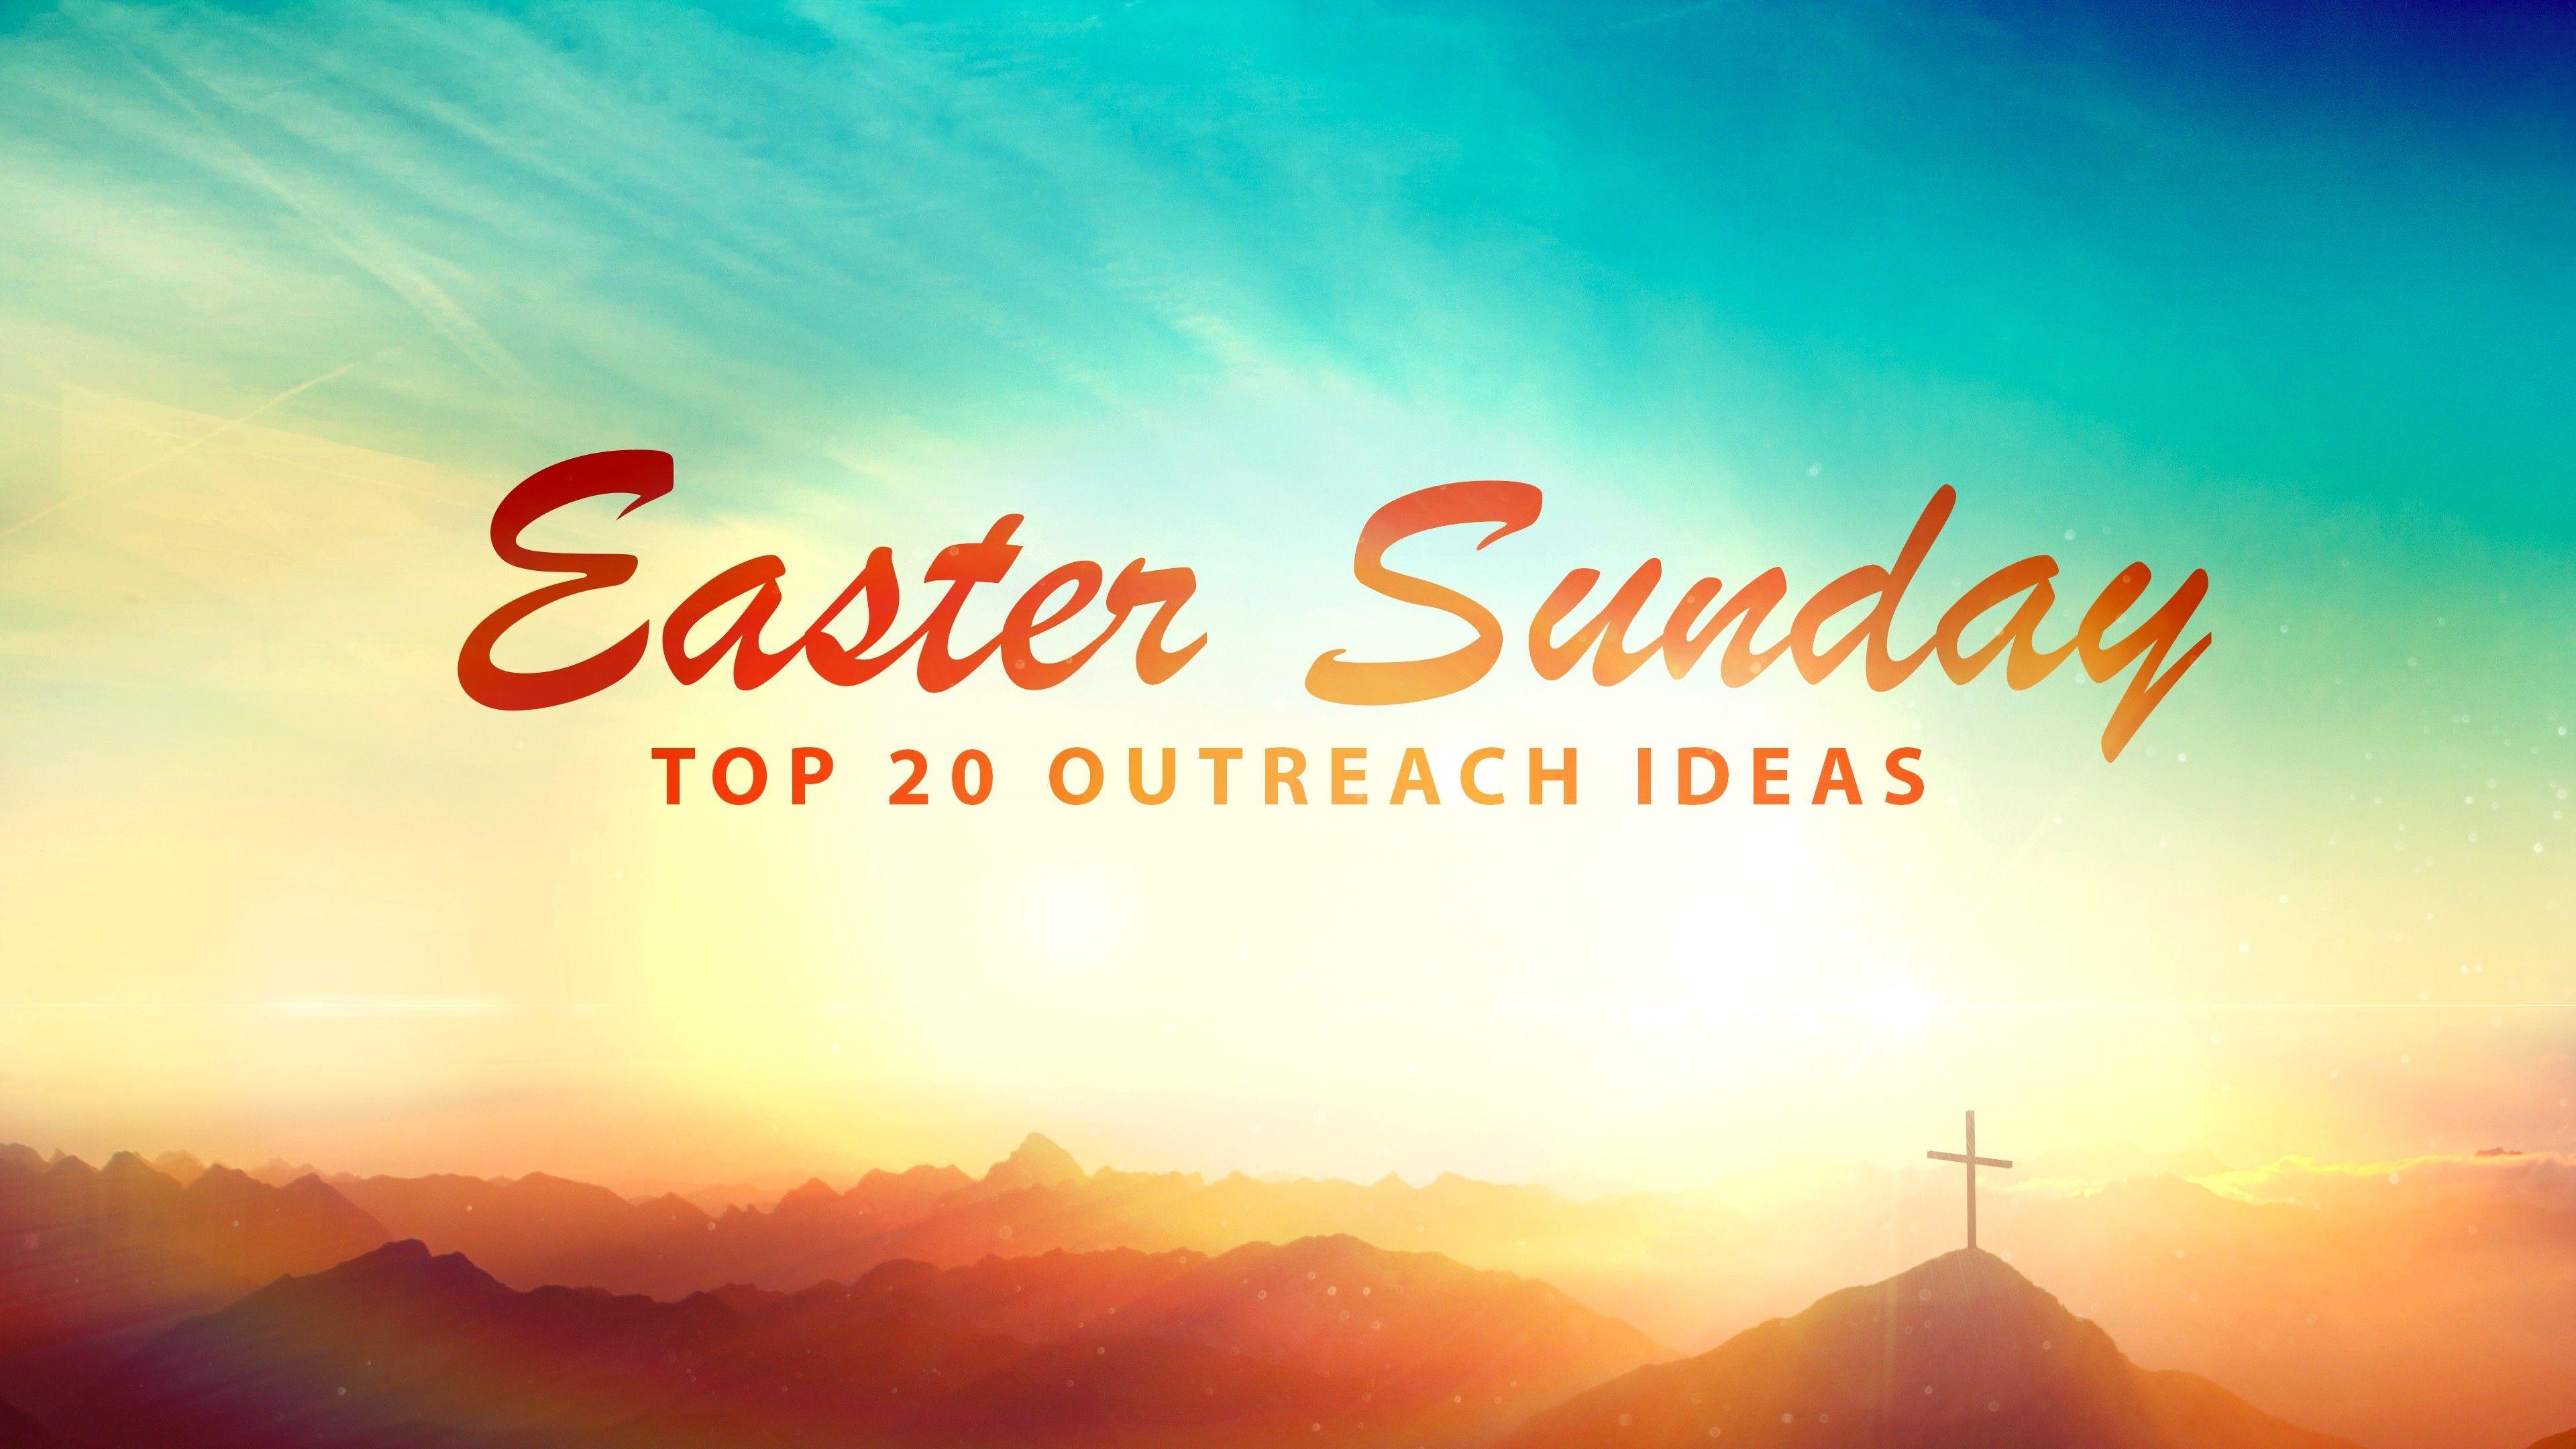 Easter Sunday Wallpapers Top Free Easter Sunday Backgrounds